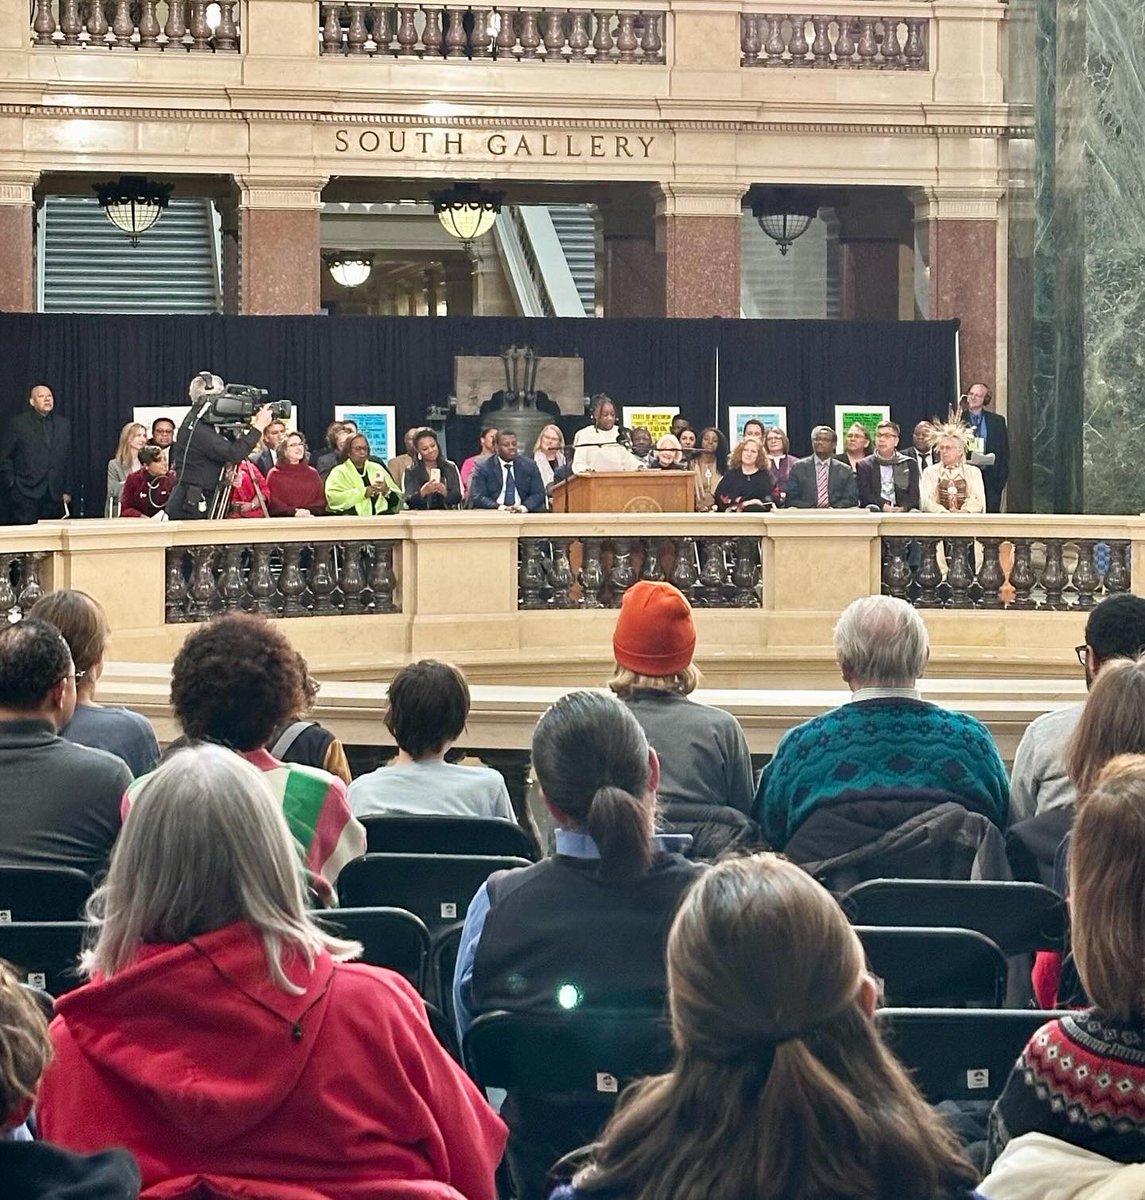 Happy MLK Day! It was a pleasure to attend a beautiful and moving tribute at the Capitol today to celebrate Dr. King’s tremendous life, legacy, and vision. Join us as we continue the reflection and celebration at @UWMadison on January 31: diversity.wisc.edu/mlk-symposium/